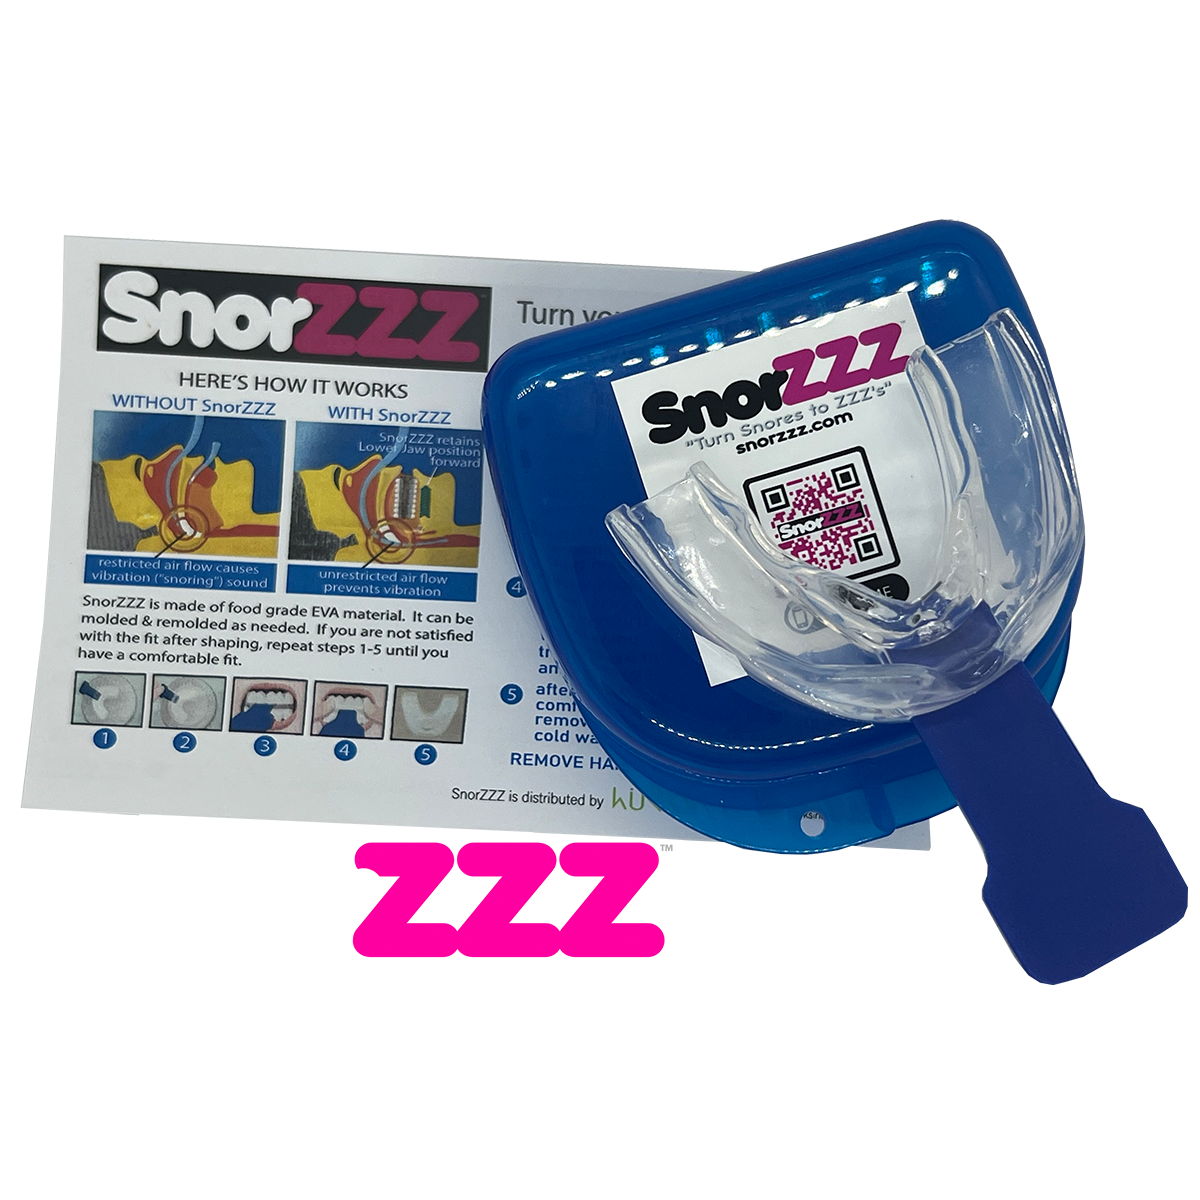 SnorZZZ - 2 Devices for $44.98 = 2 Complete Sets (SAVE 10%)